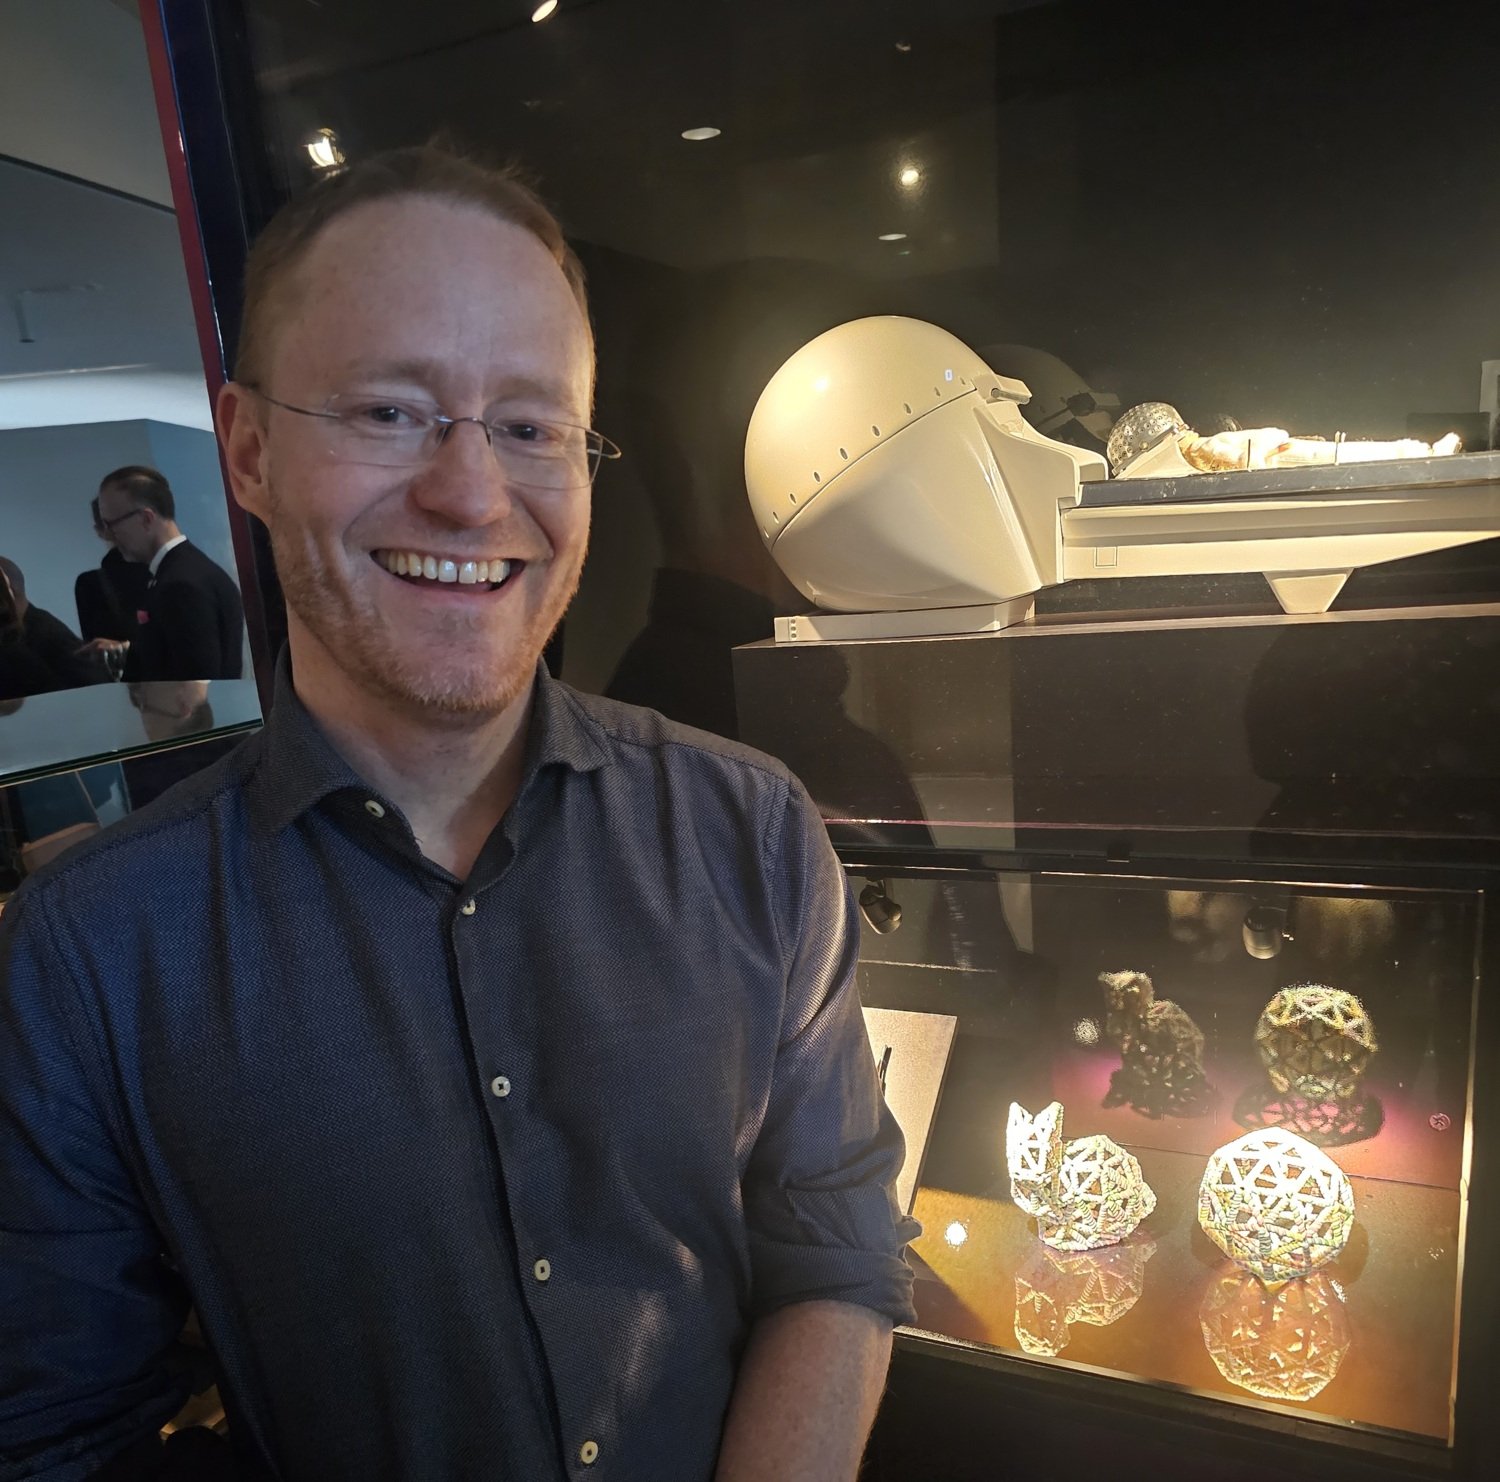 Björn Högberg with his DNA origami on display at The Cell.